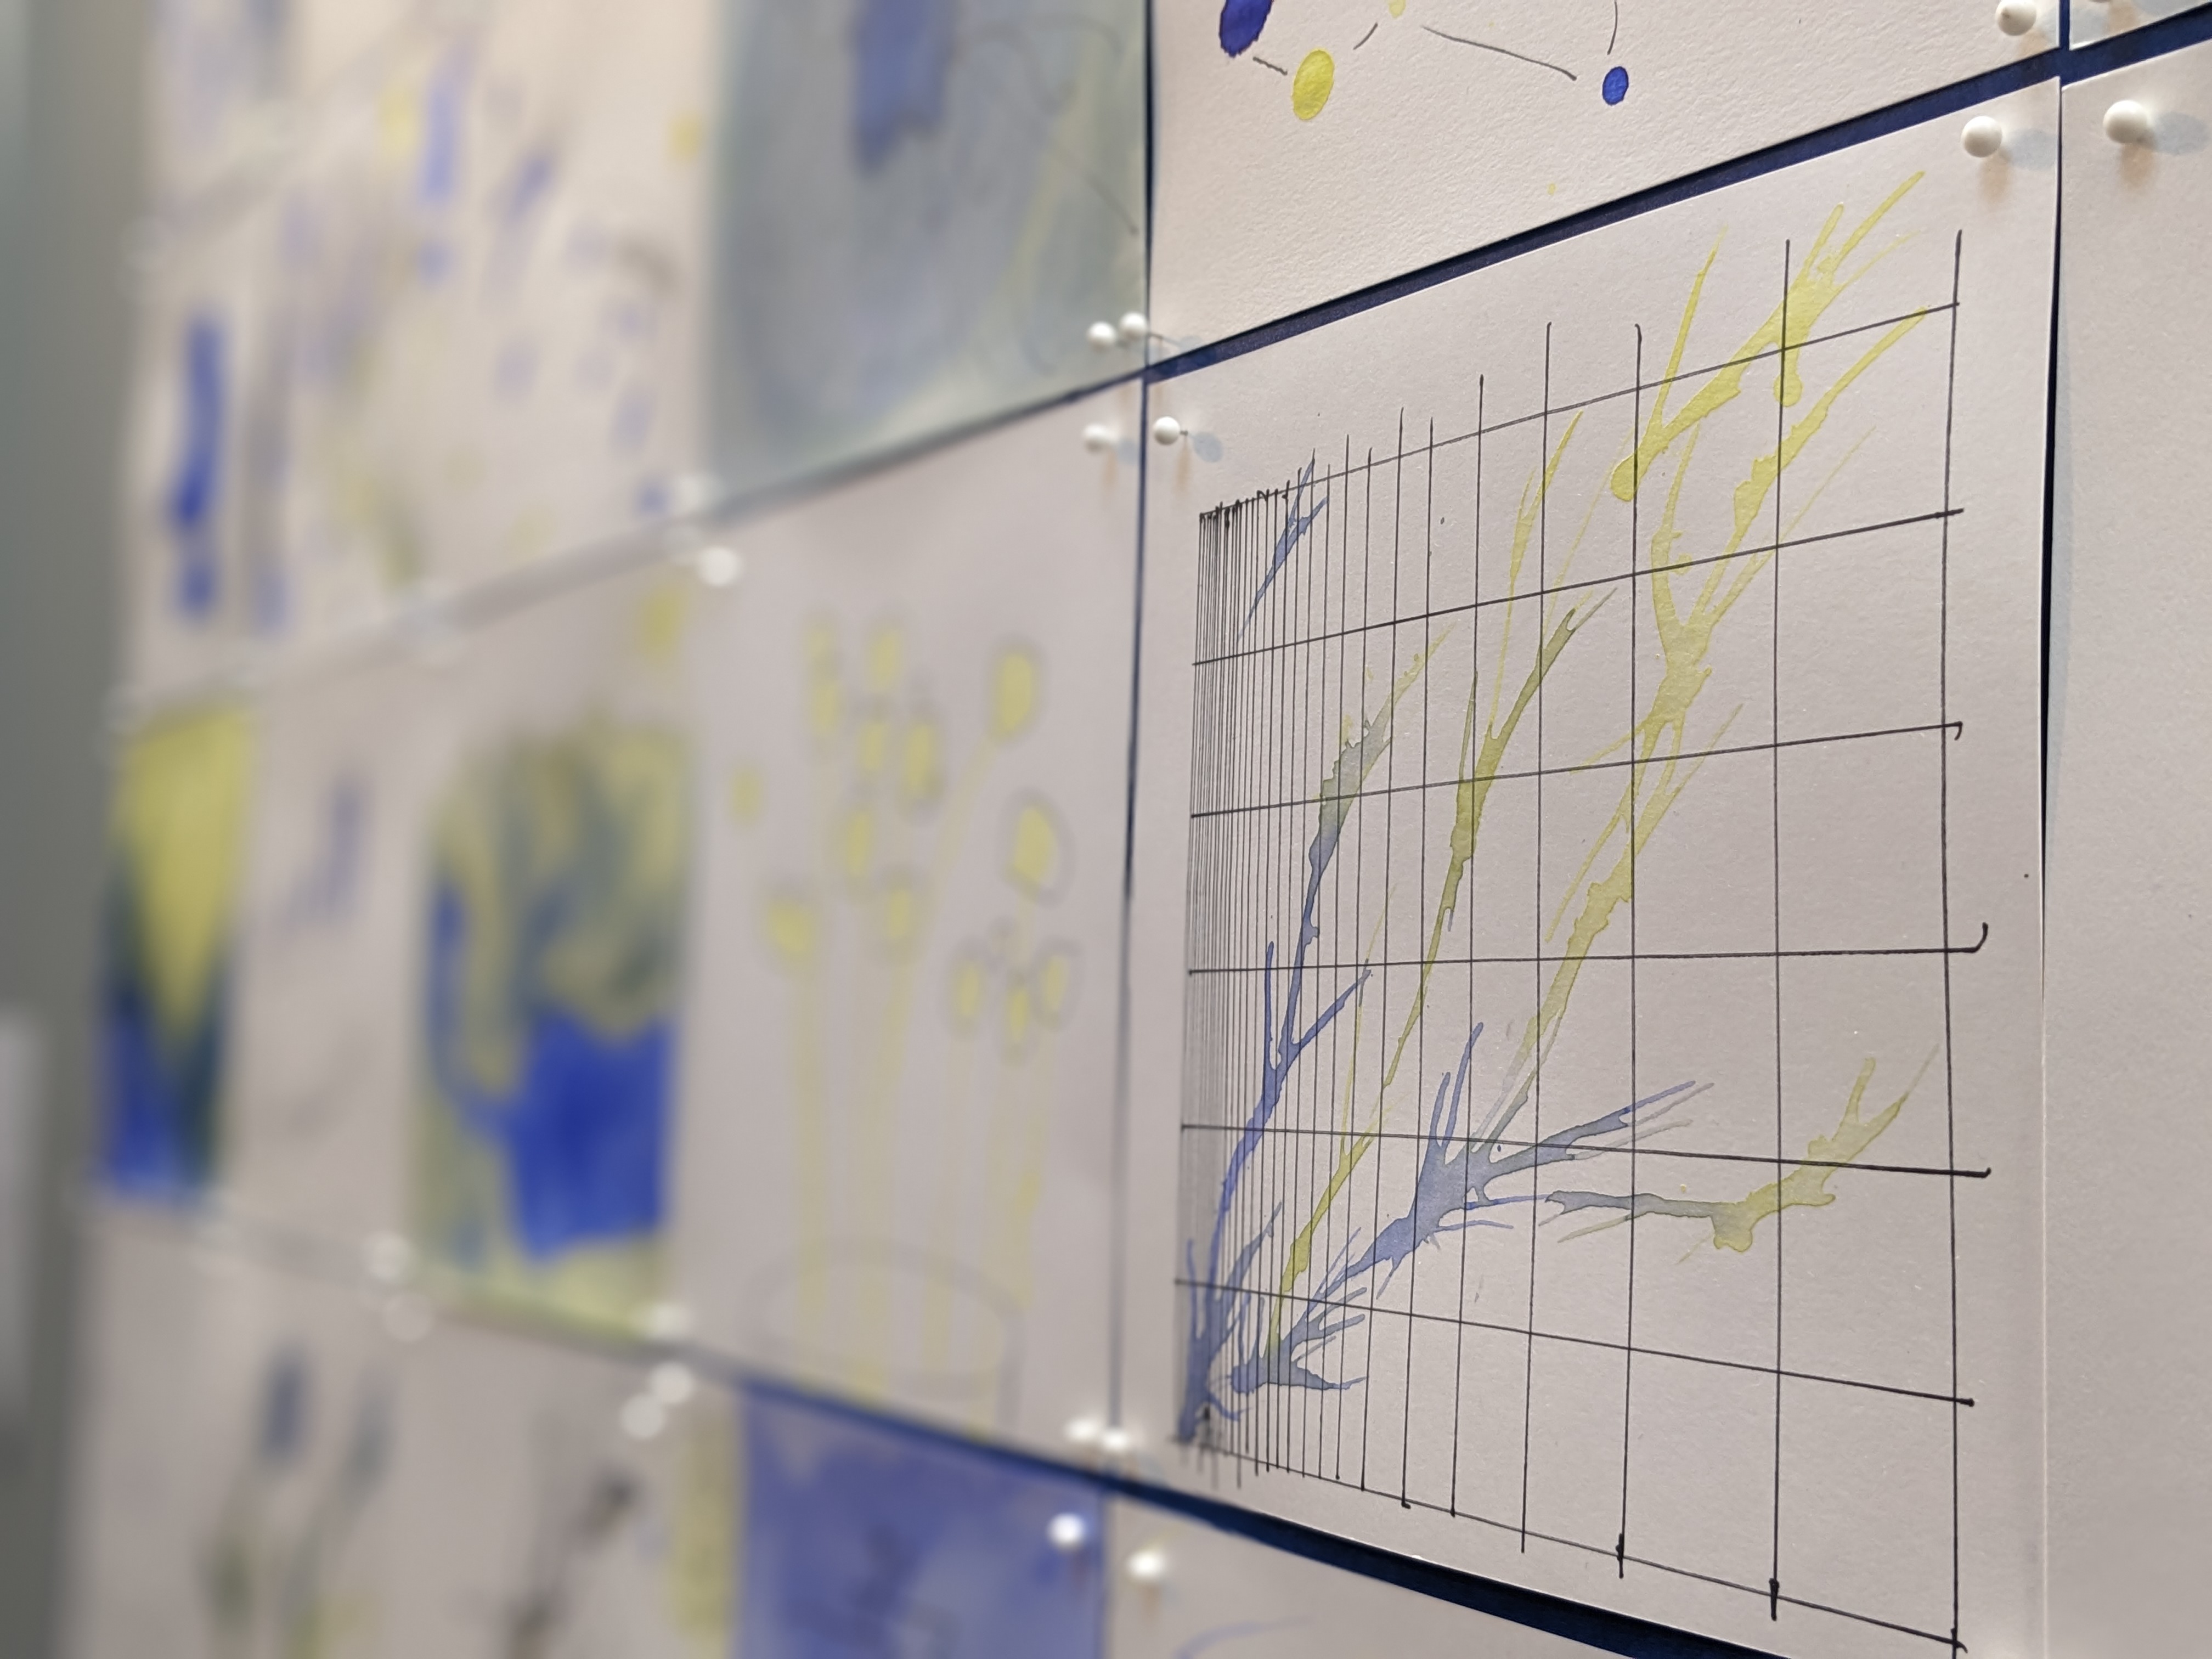 Scientists at the Conference on Biological Stoichoimetry created 8X8 paintings with blue and yellow watercolors and pipettes. The Constellation Studios gallery in Lincoln displayed the paintings as a mosaic. Photo courtesy of Elyse Watson